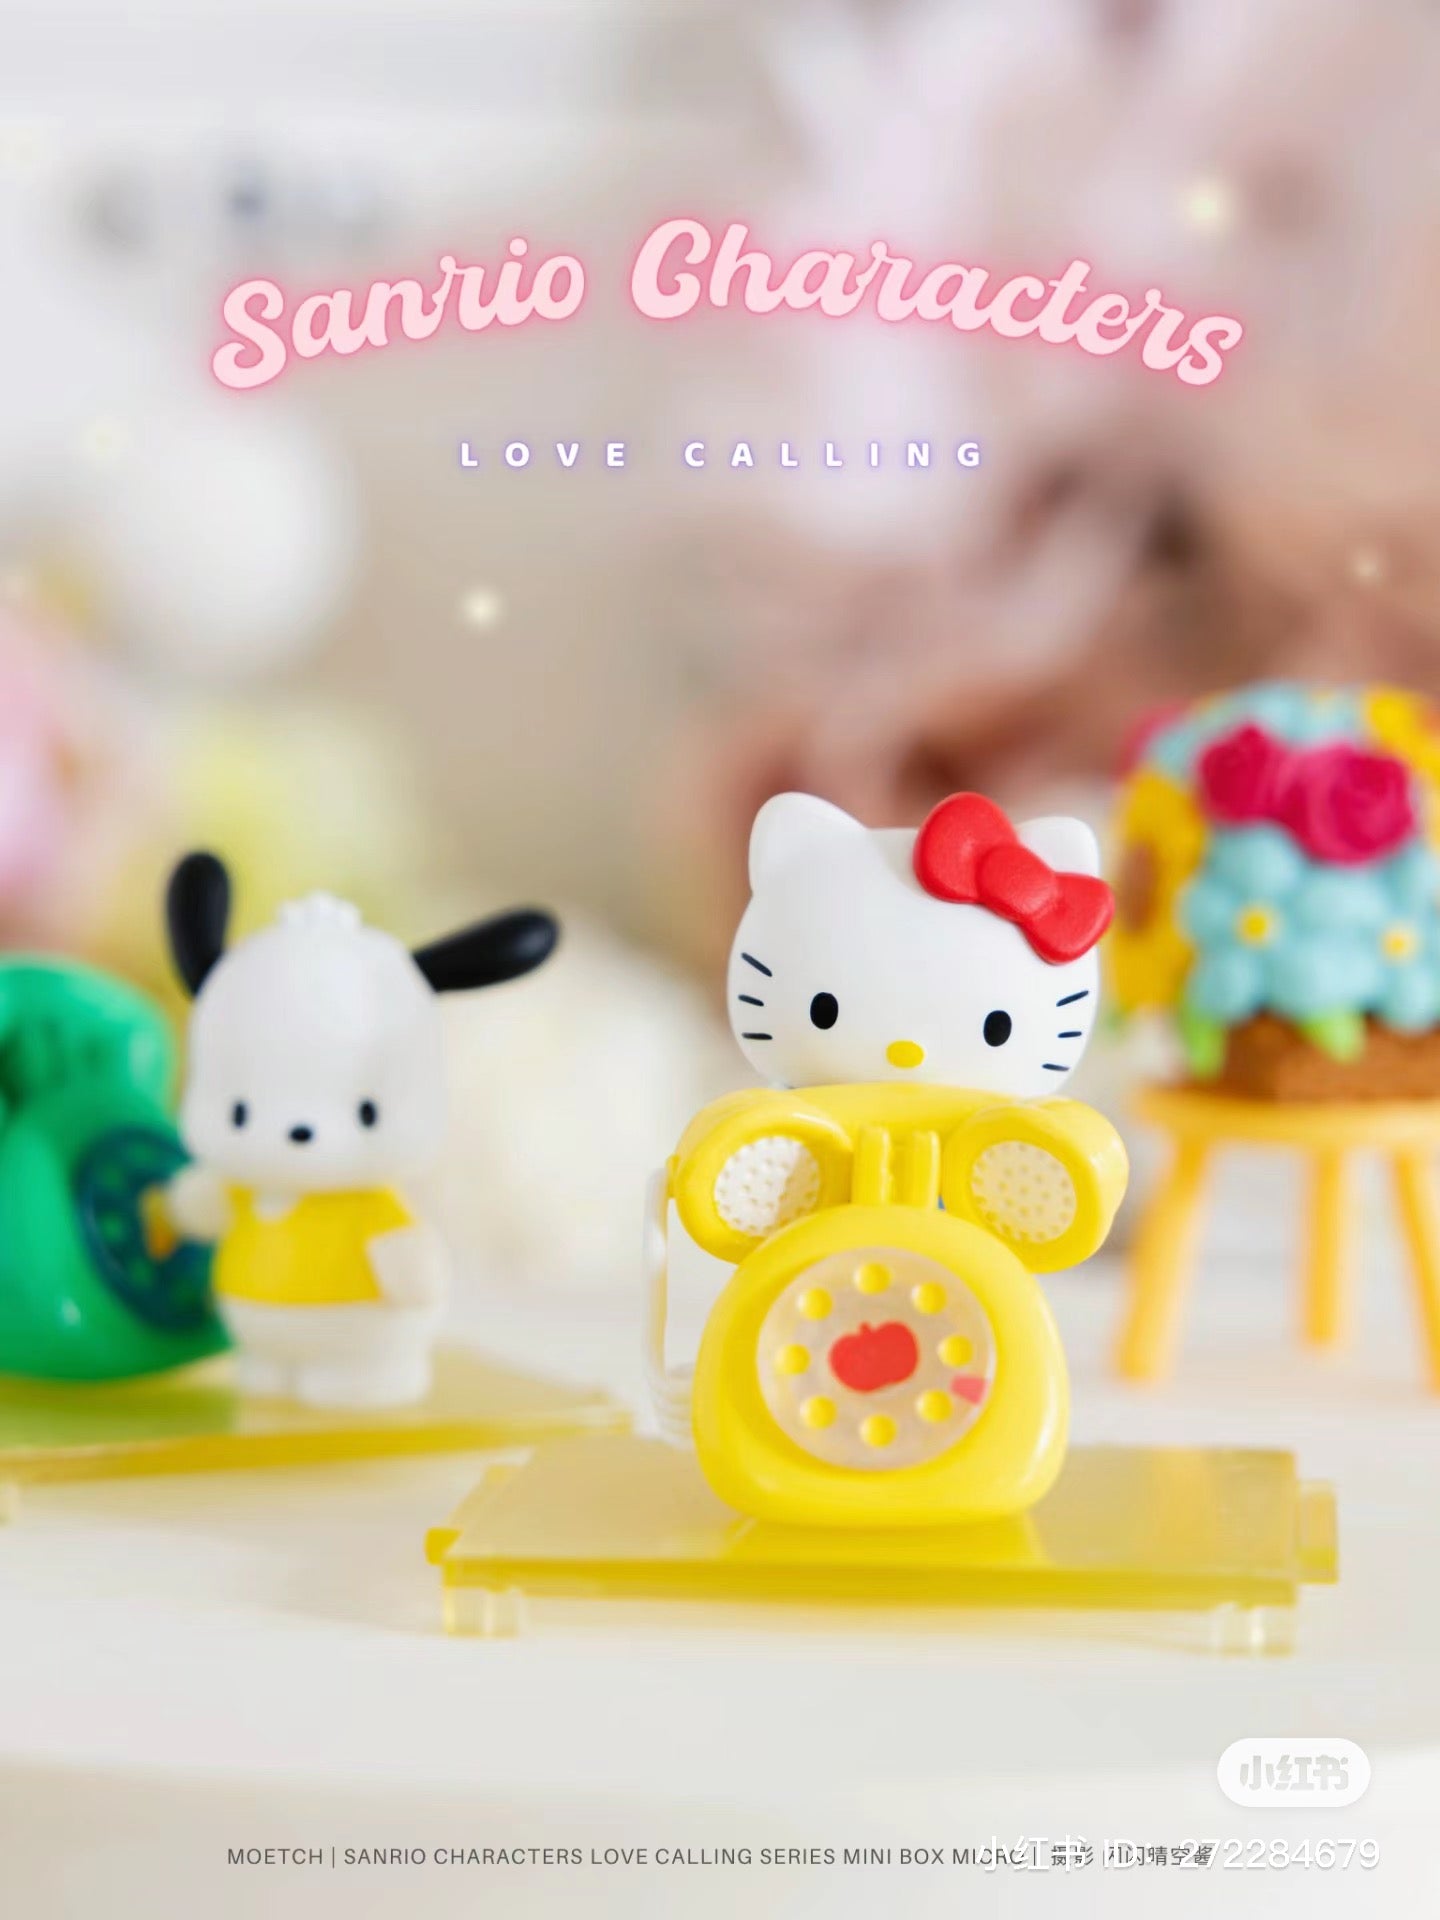 Sanrio characters Love Calling Series Mini Box: a group of collectible toy figures on a table, including Hello Kitty-themed designs.